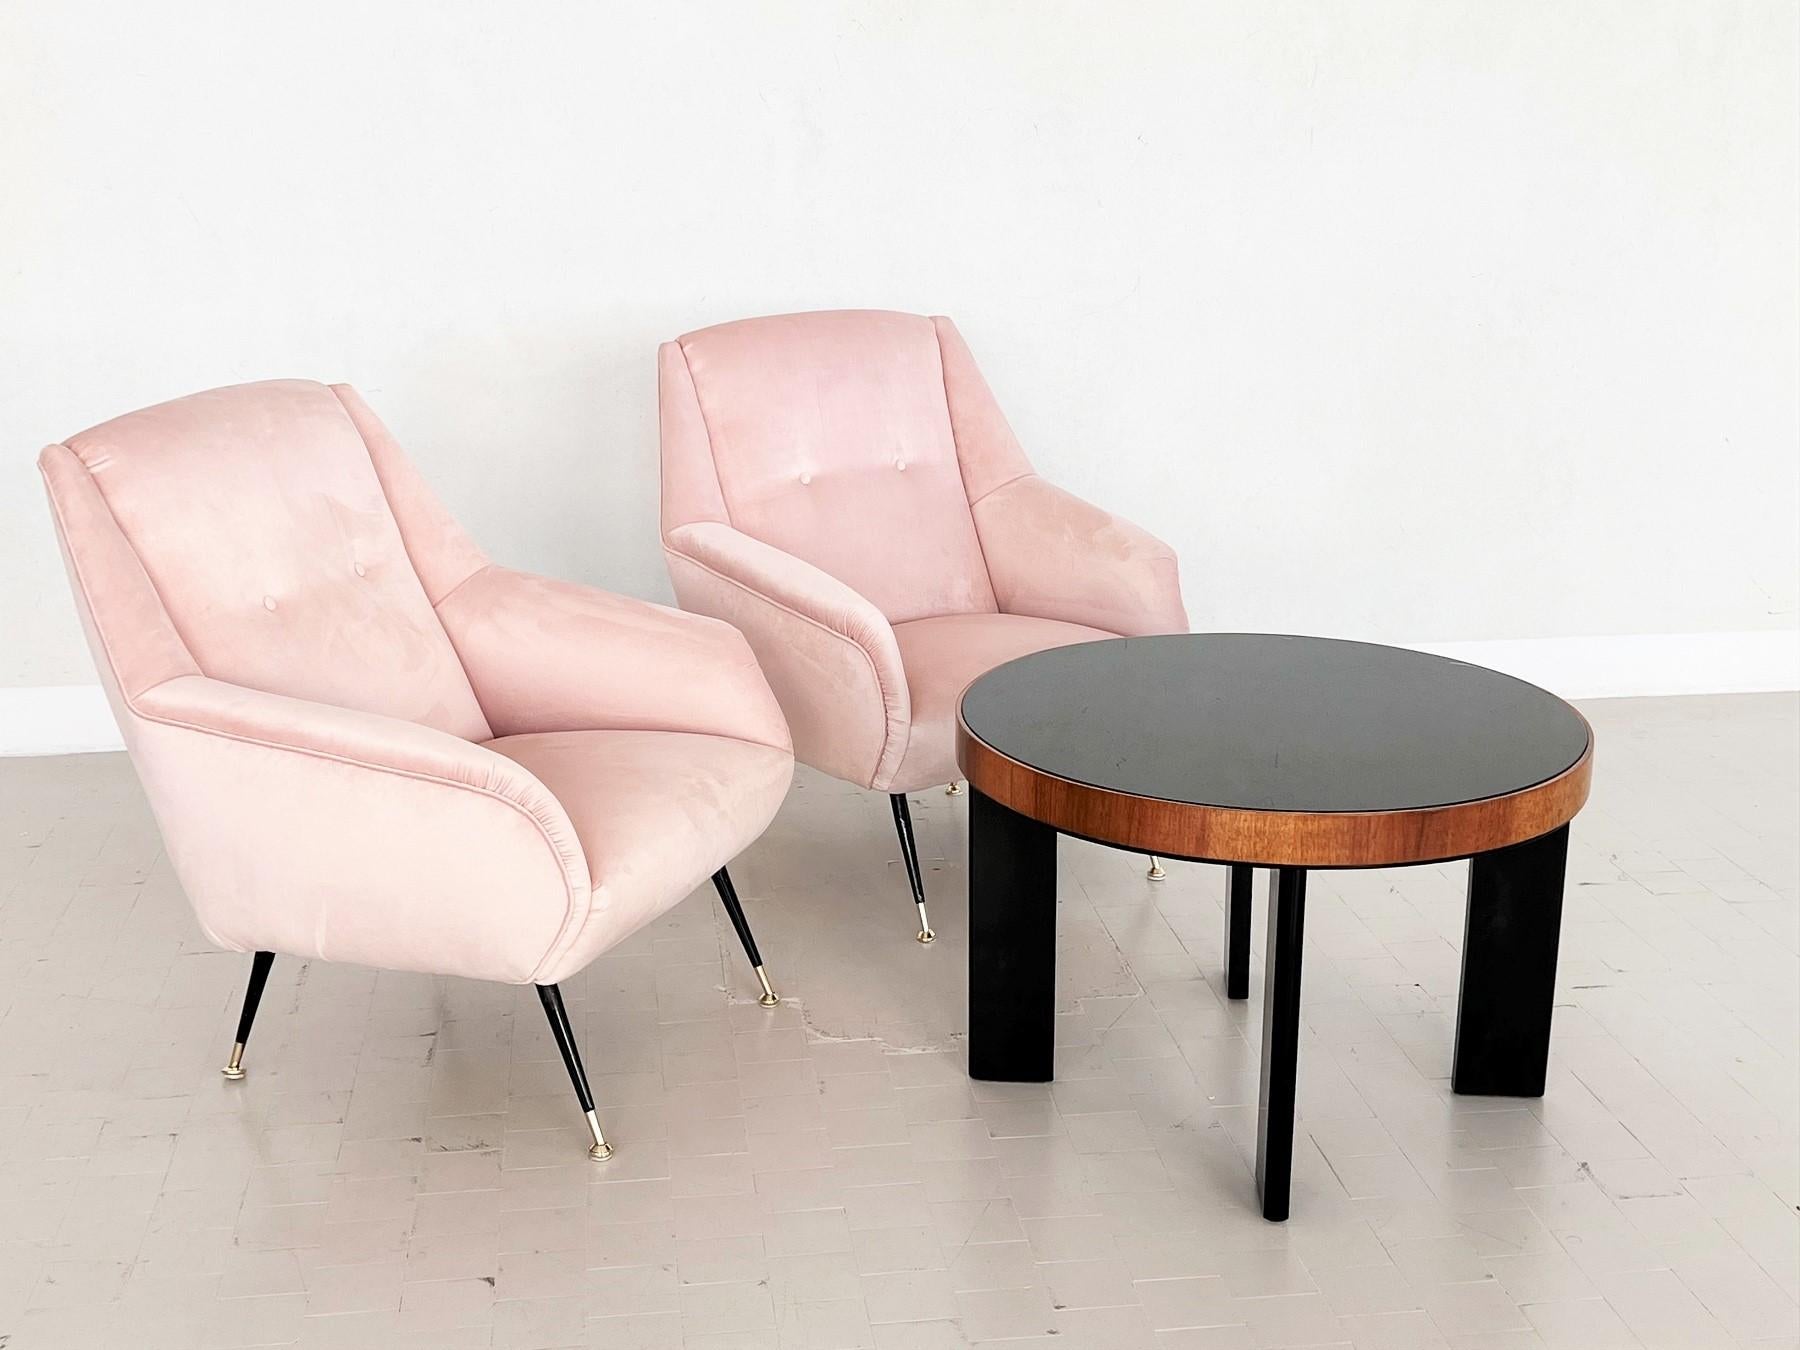 Italian Midcentury Armchairs in Soft Pink Velvet and Brass Tips, 1950s For Sale 11